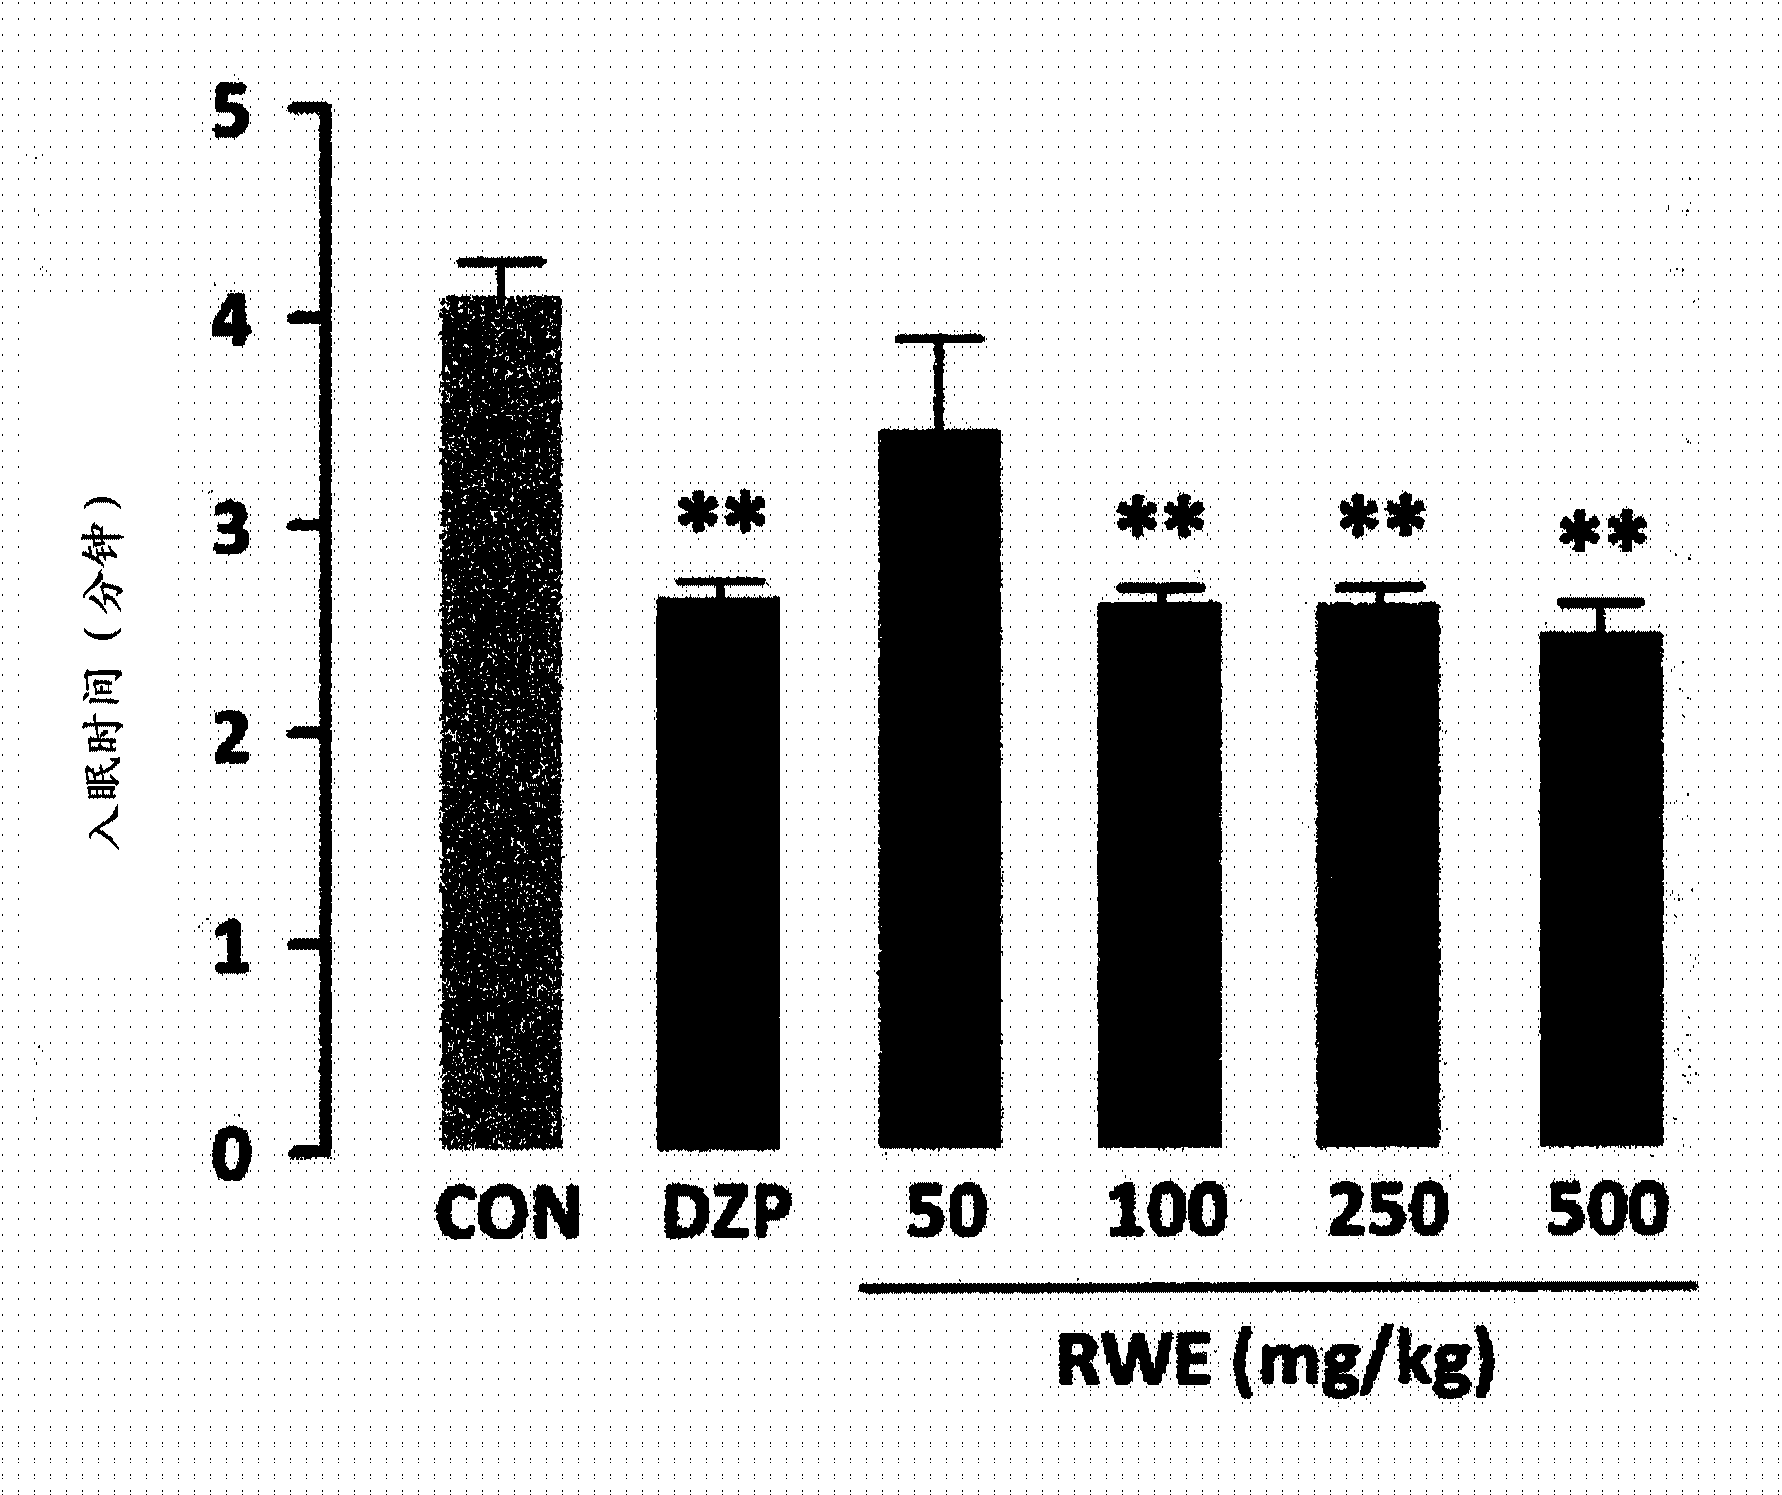 Novel usage of rice, rice bran, or chaff extract as histamine receptor antagonist